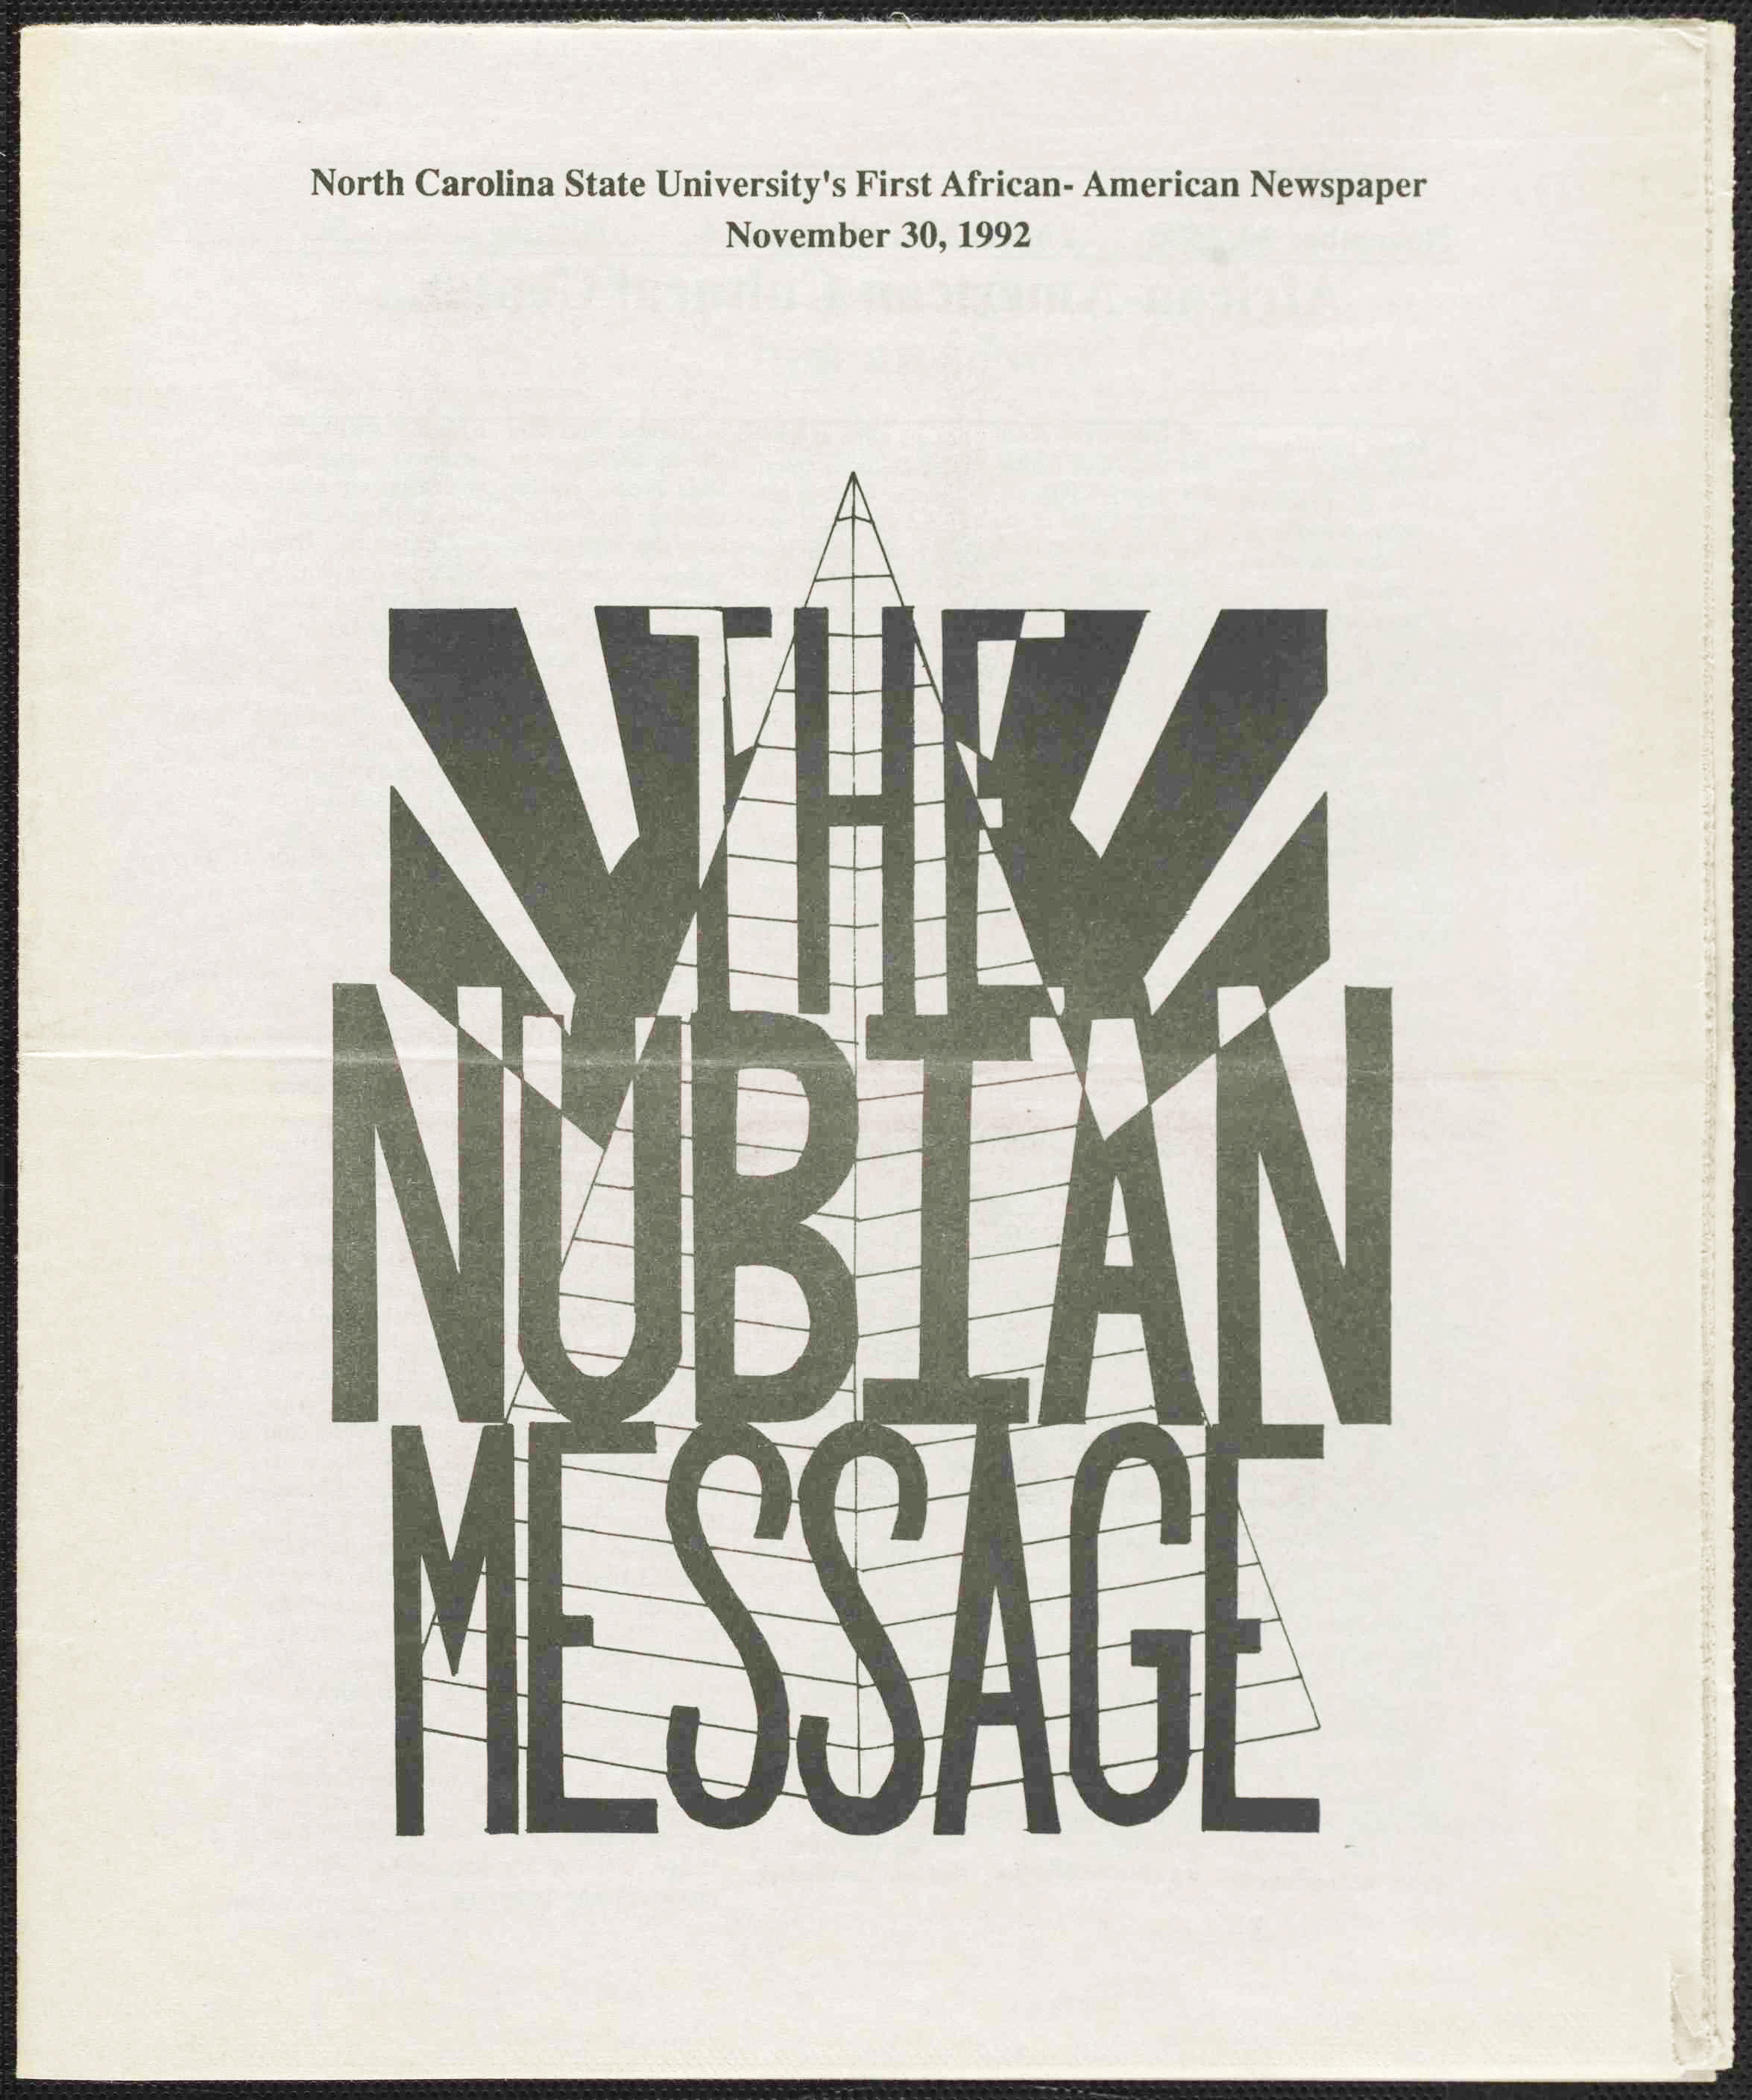 A Timeline of the Nubian Message at NC State